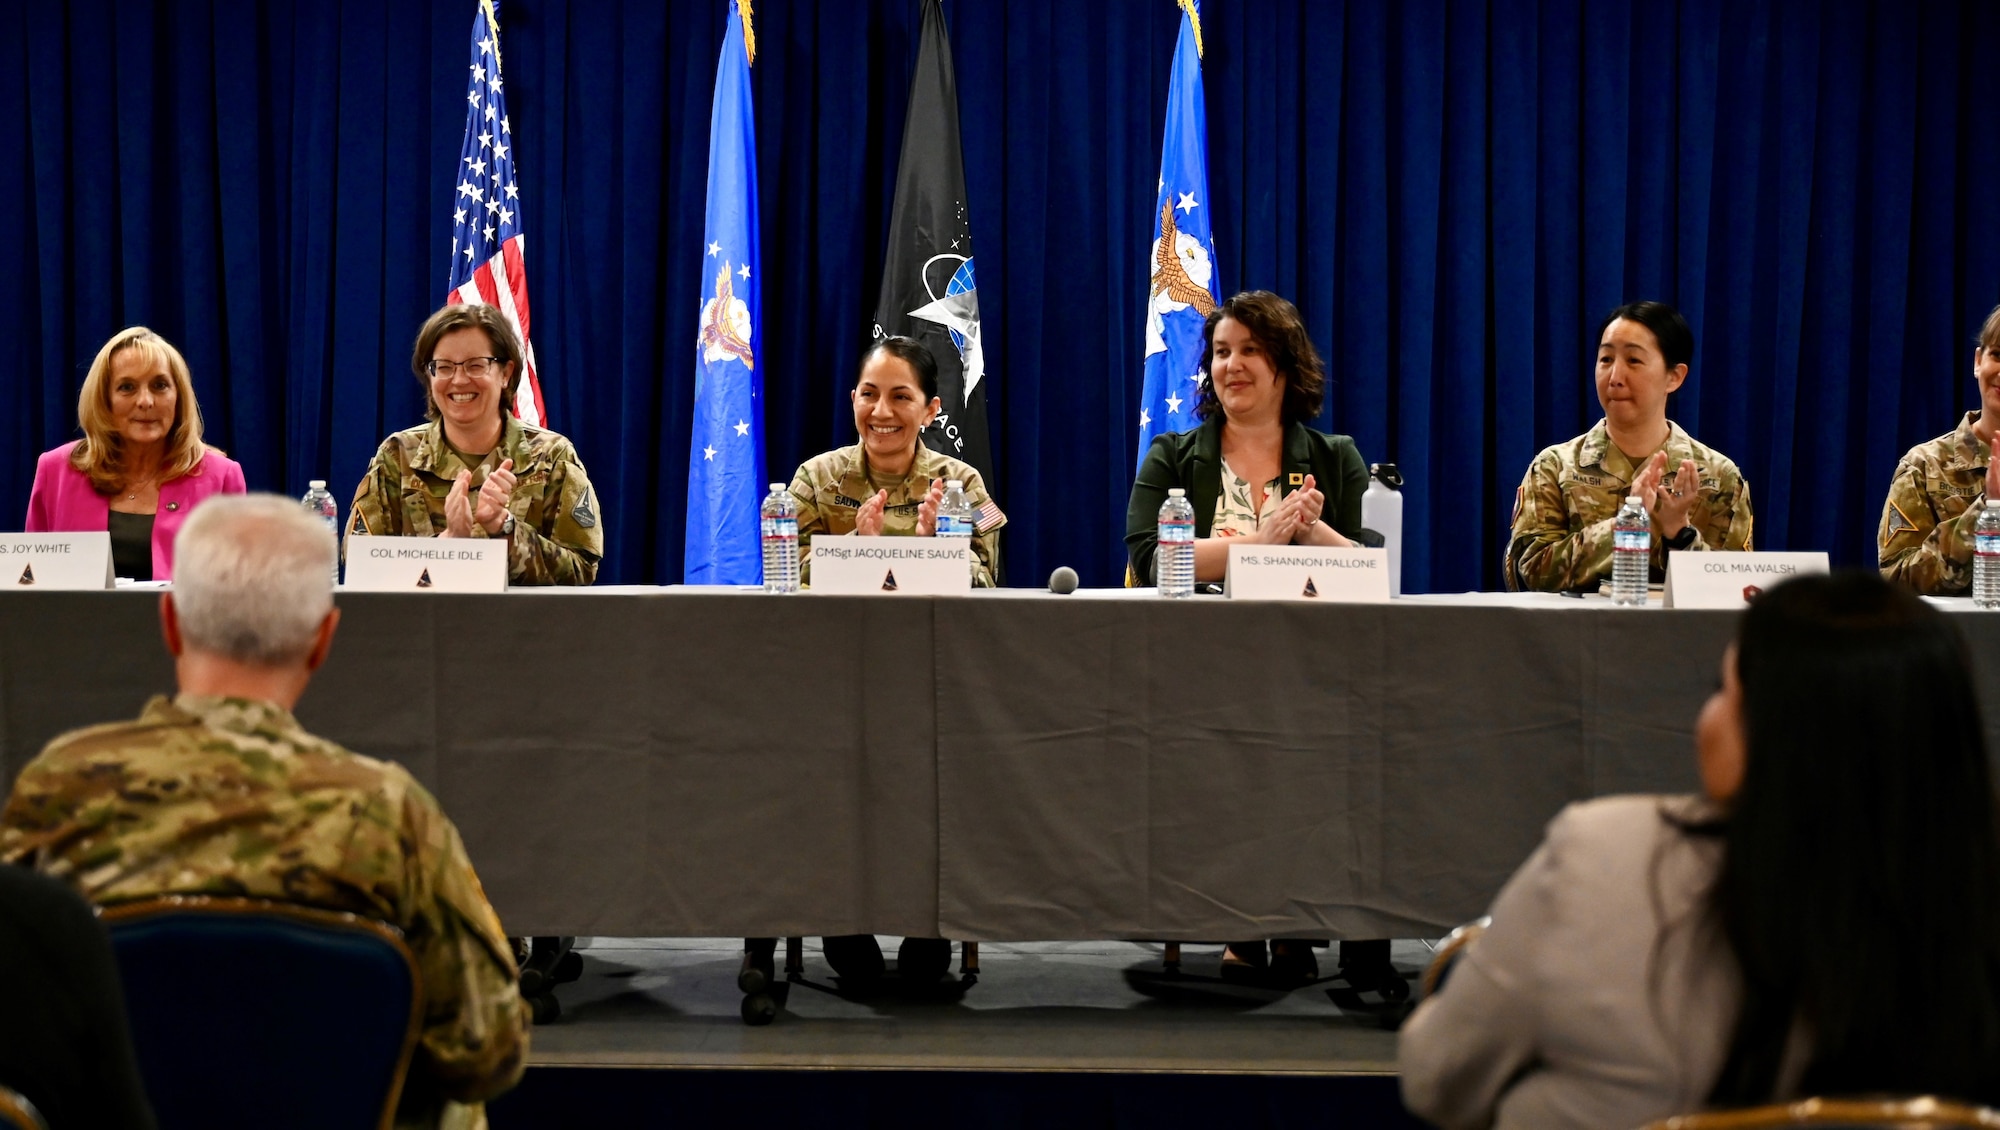 Los Angeles Air Force Base’s Women In Leadership Panel speakers on March 25, 2024 pictured from left to right behind the table: Ms. Joy M. White, Colonel Michele Idle, Chief Master Sergeant Jacqueline Sauvé, Ms. Shannon Pallone; Colonel Mia L. Walsh, and Colonel Heather B. Bogstie. Lieutenant General Philip Garrant, SSC’s Commander, was in the audience, along with many other distinguished guests.